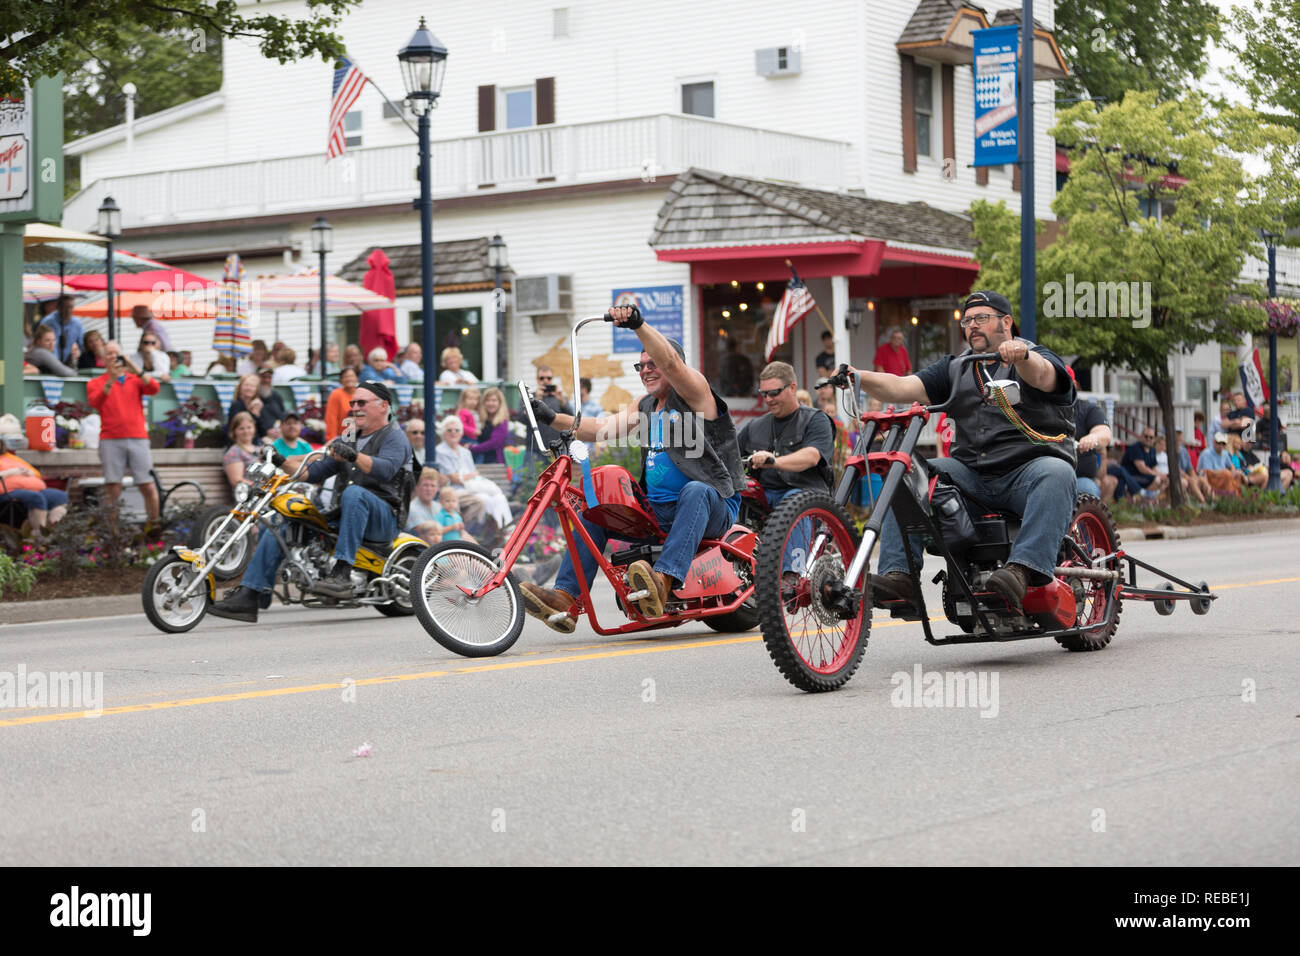 Frankenmuth, Michigan, USA - June 10, 2018: The Bavarian Festival Parade, Men riding costum build motorcycles on the street during the parade Stock Photo